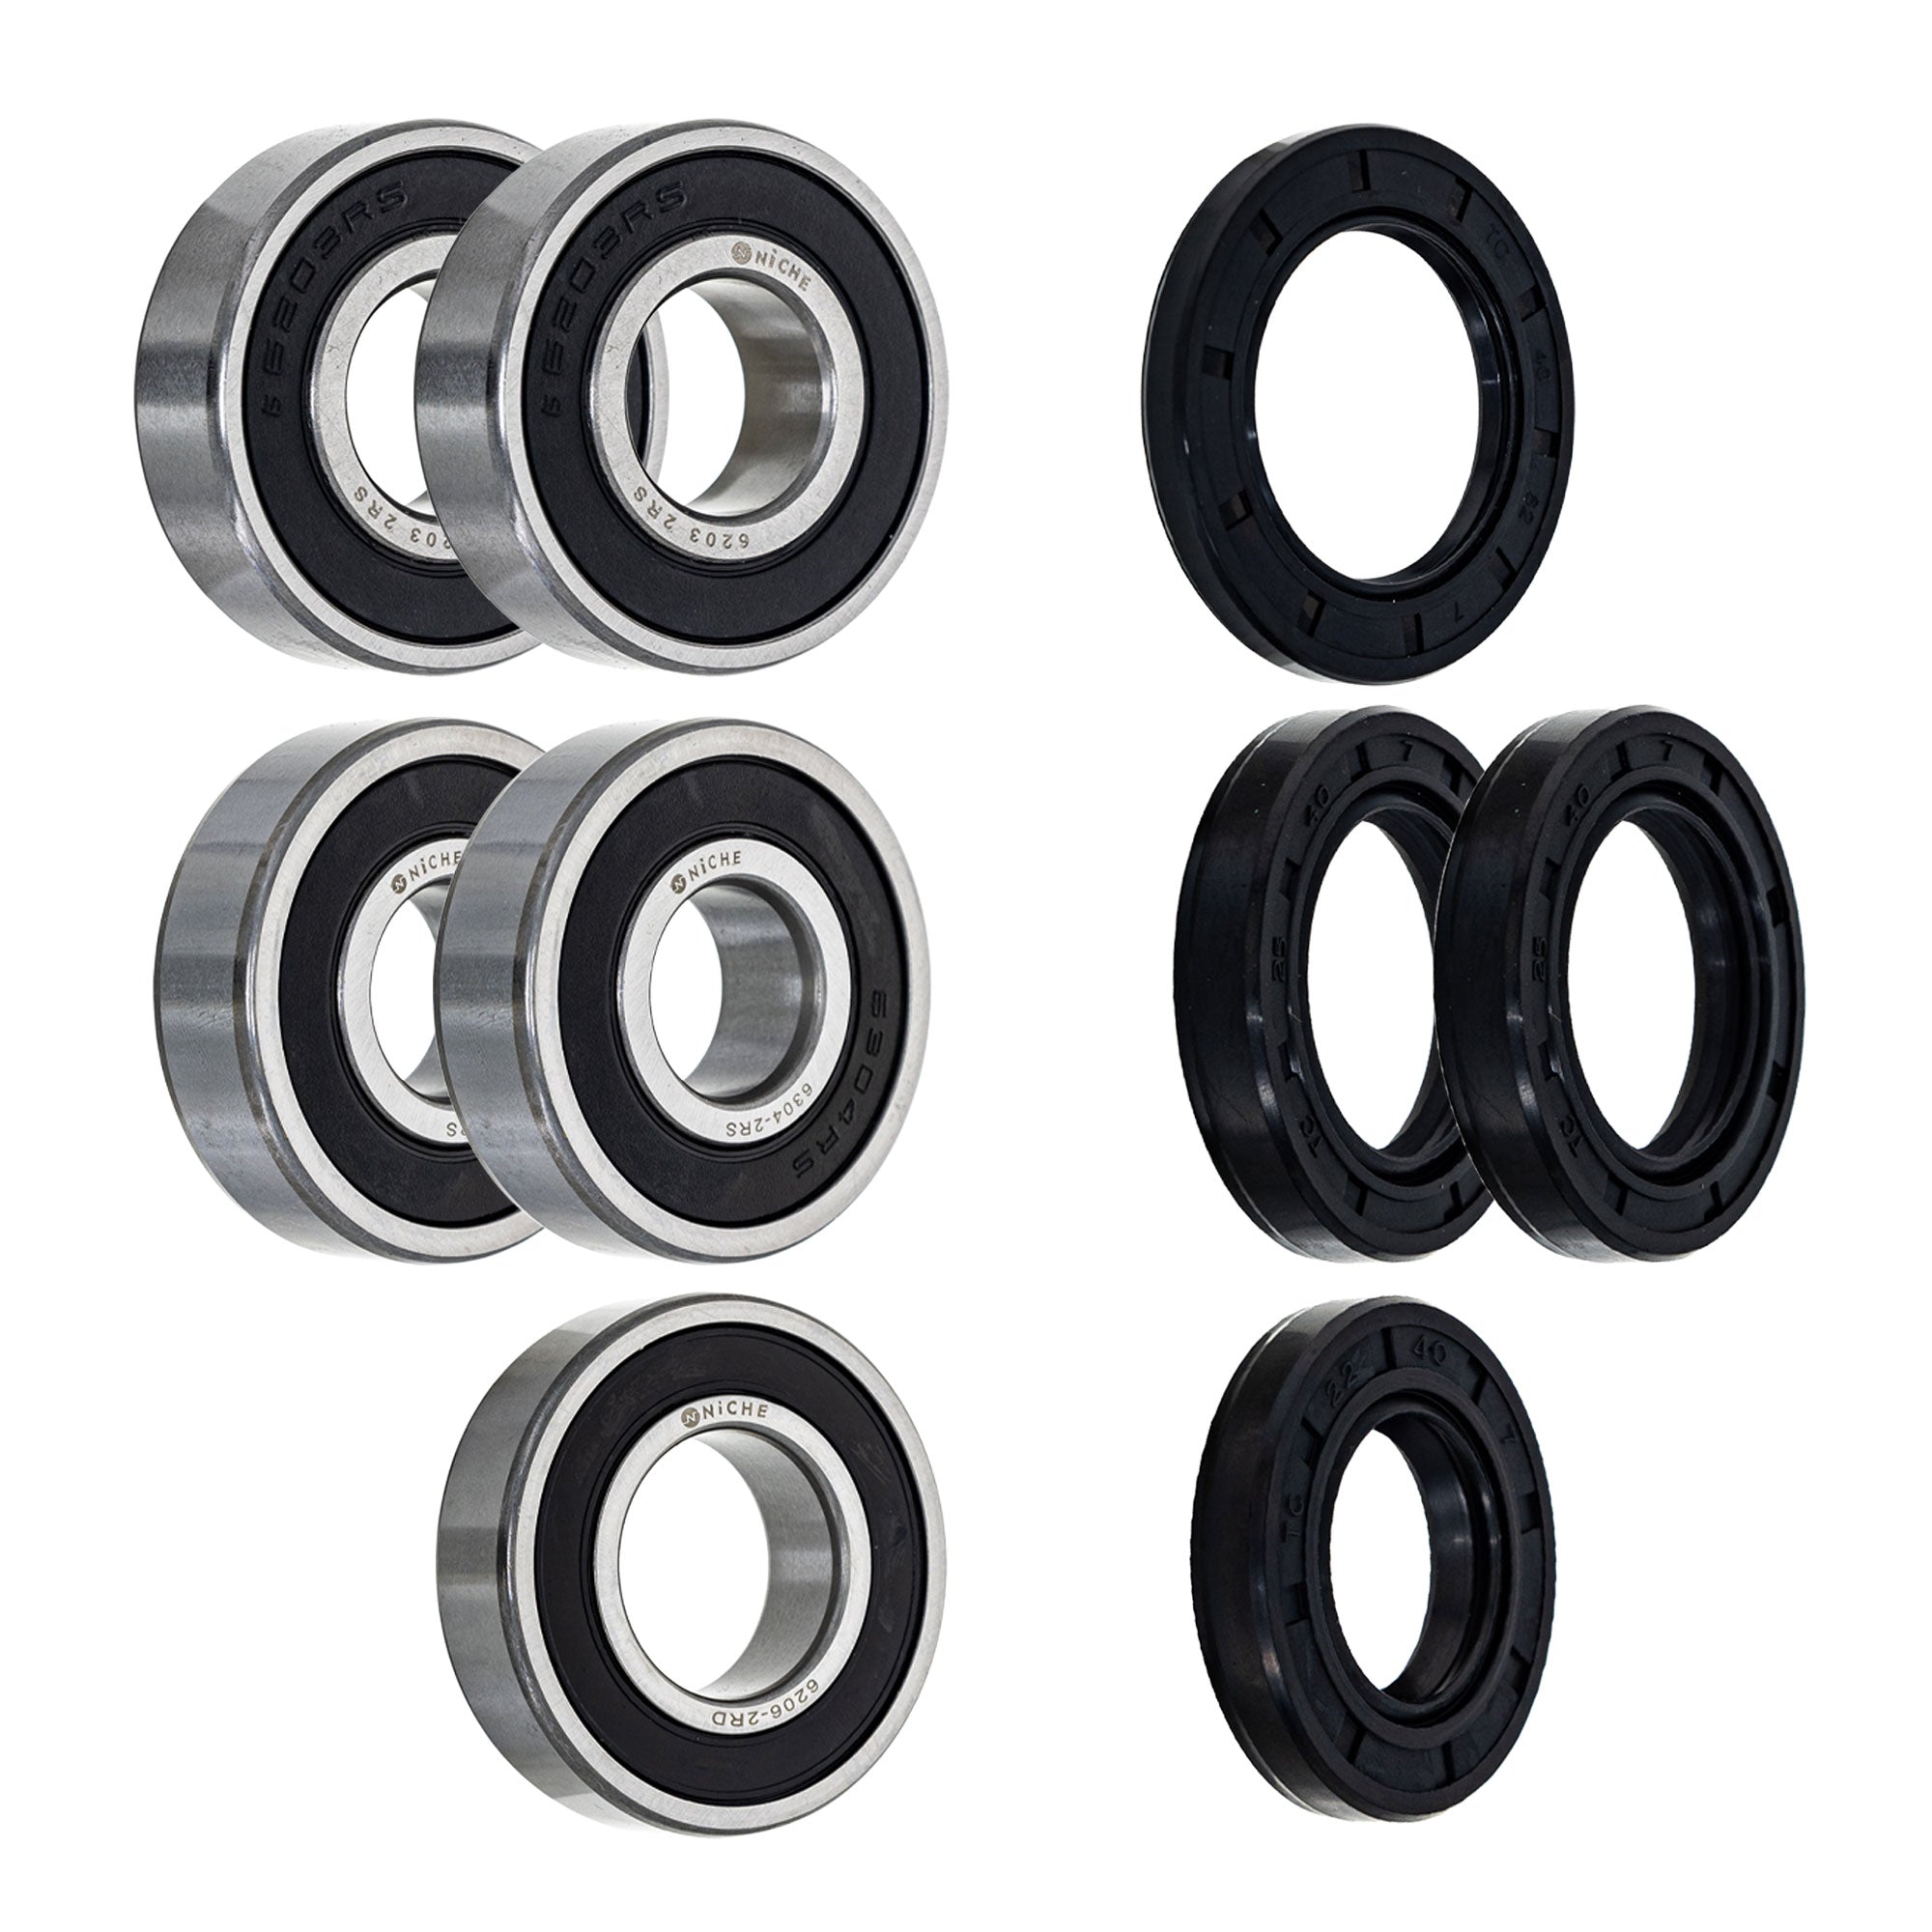 Wheel Bearing Seal Kit for zOTHER Ref No Z1 NICHE MK1008548